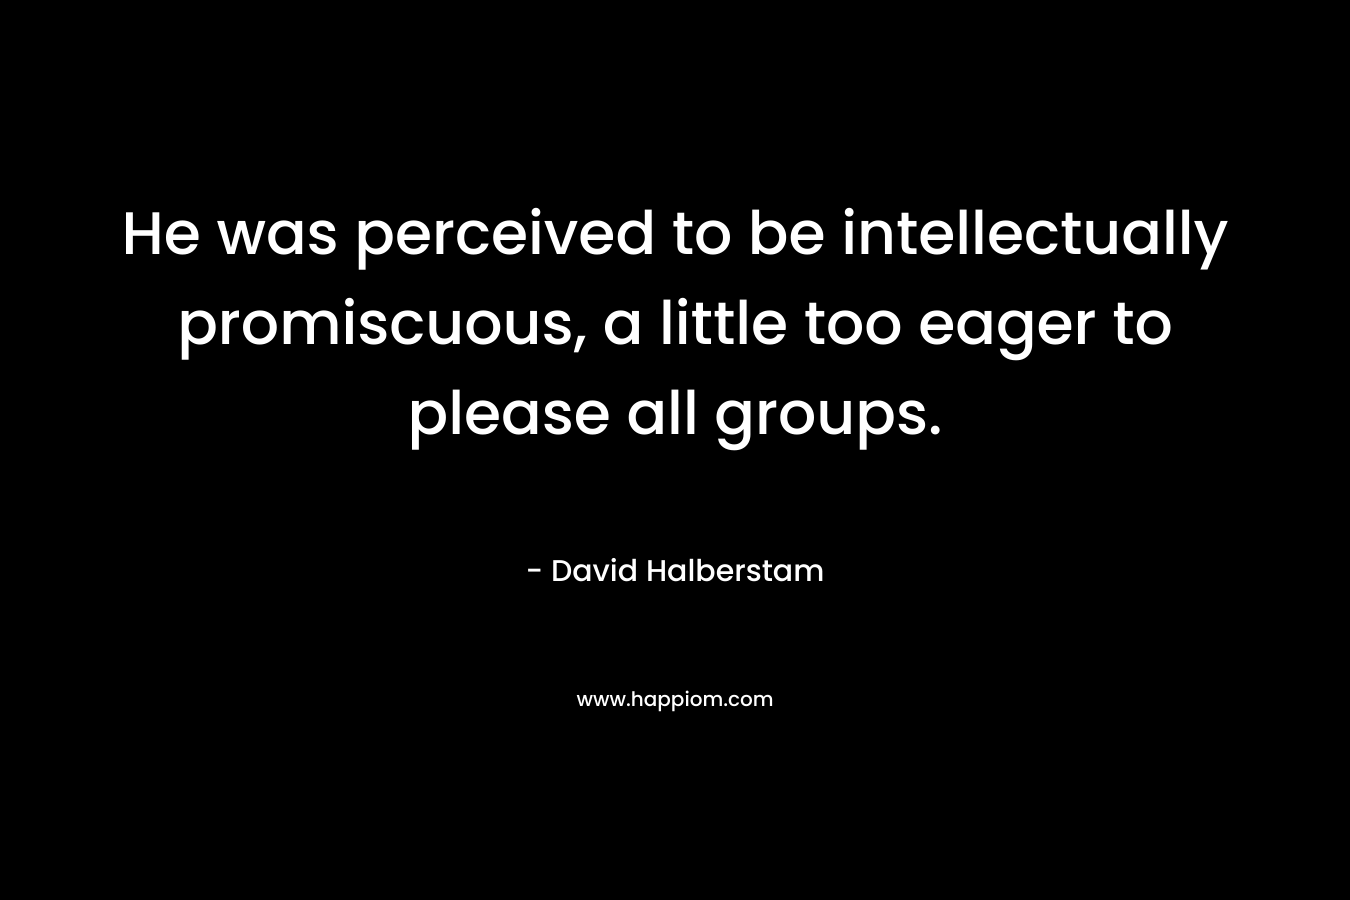 He was perceived to be intellectually promiscuous, a little too eager to please all groups. – David Halberstam